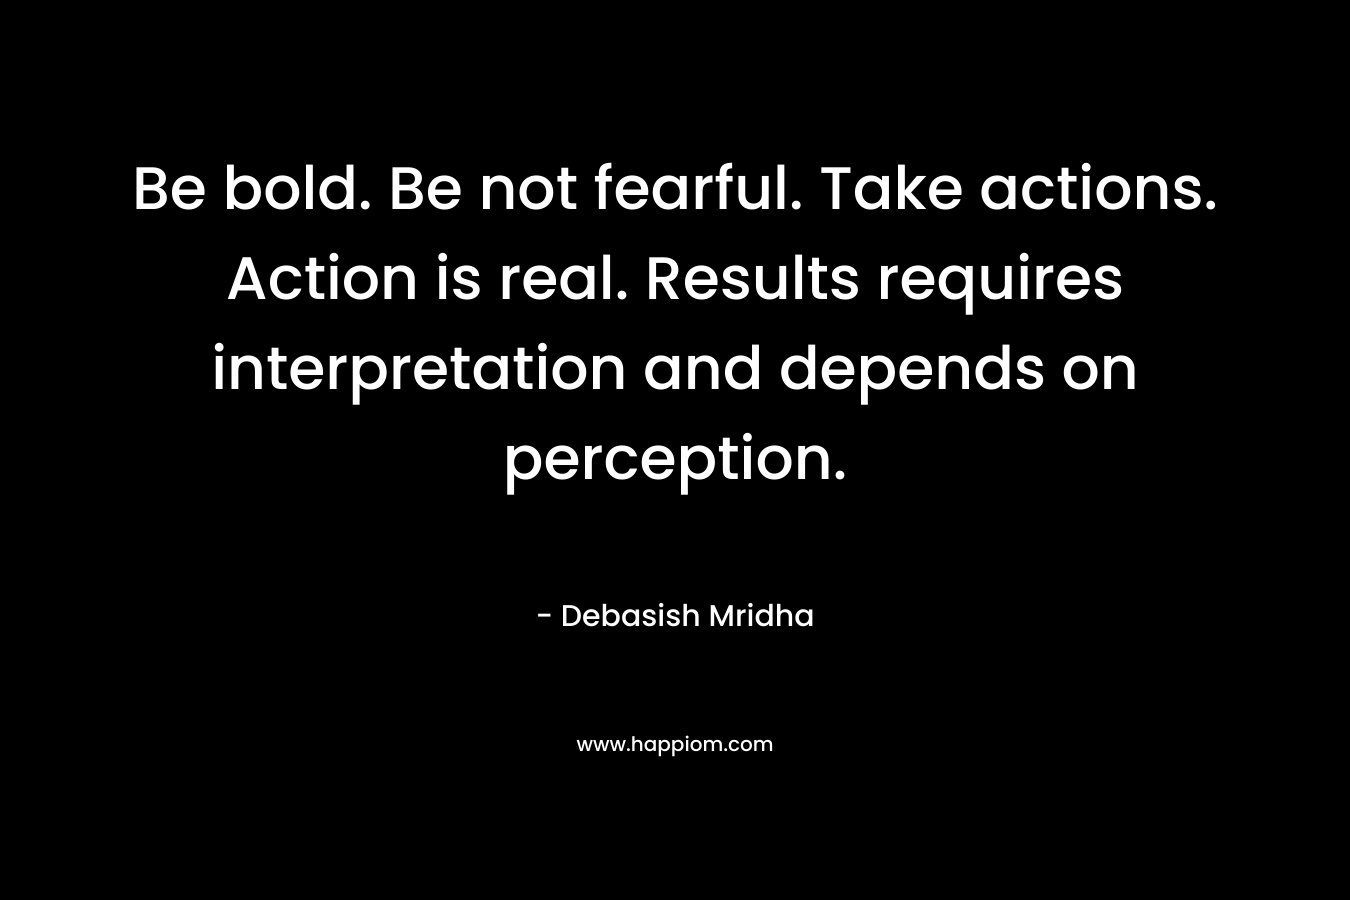 Be bold. Be not fearful. Take actions. Action is real. Results requires interpretation and depends on perception.